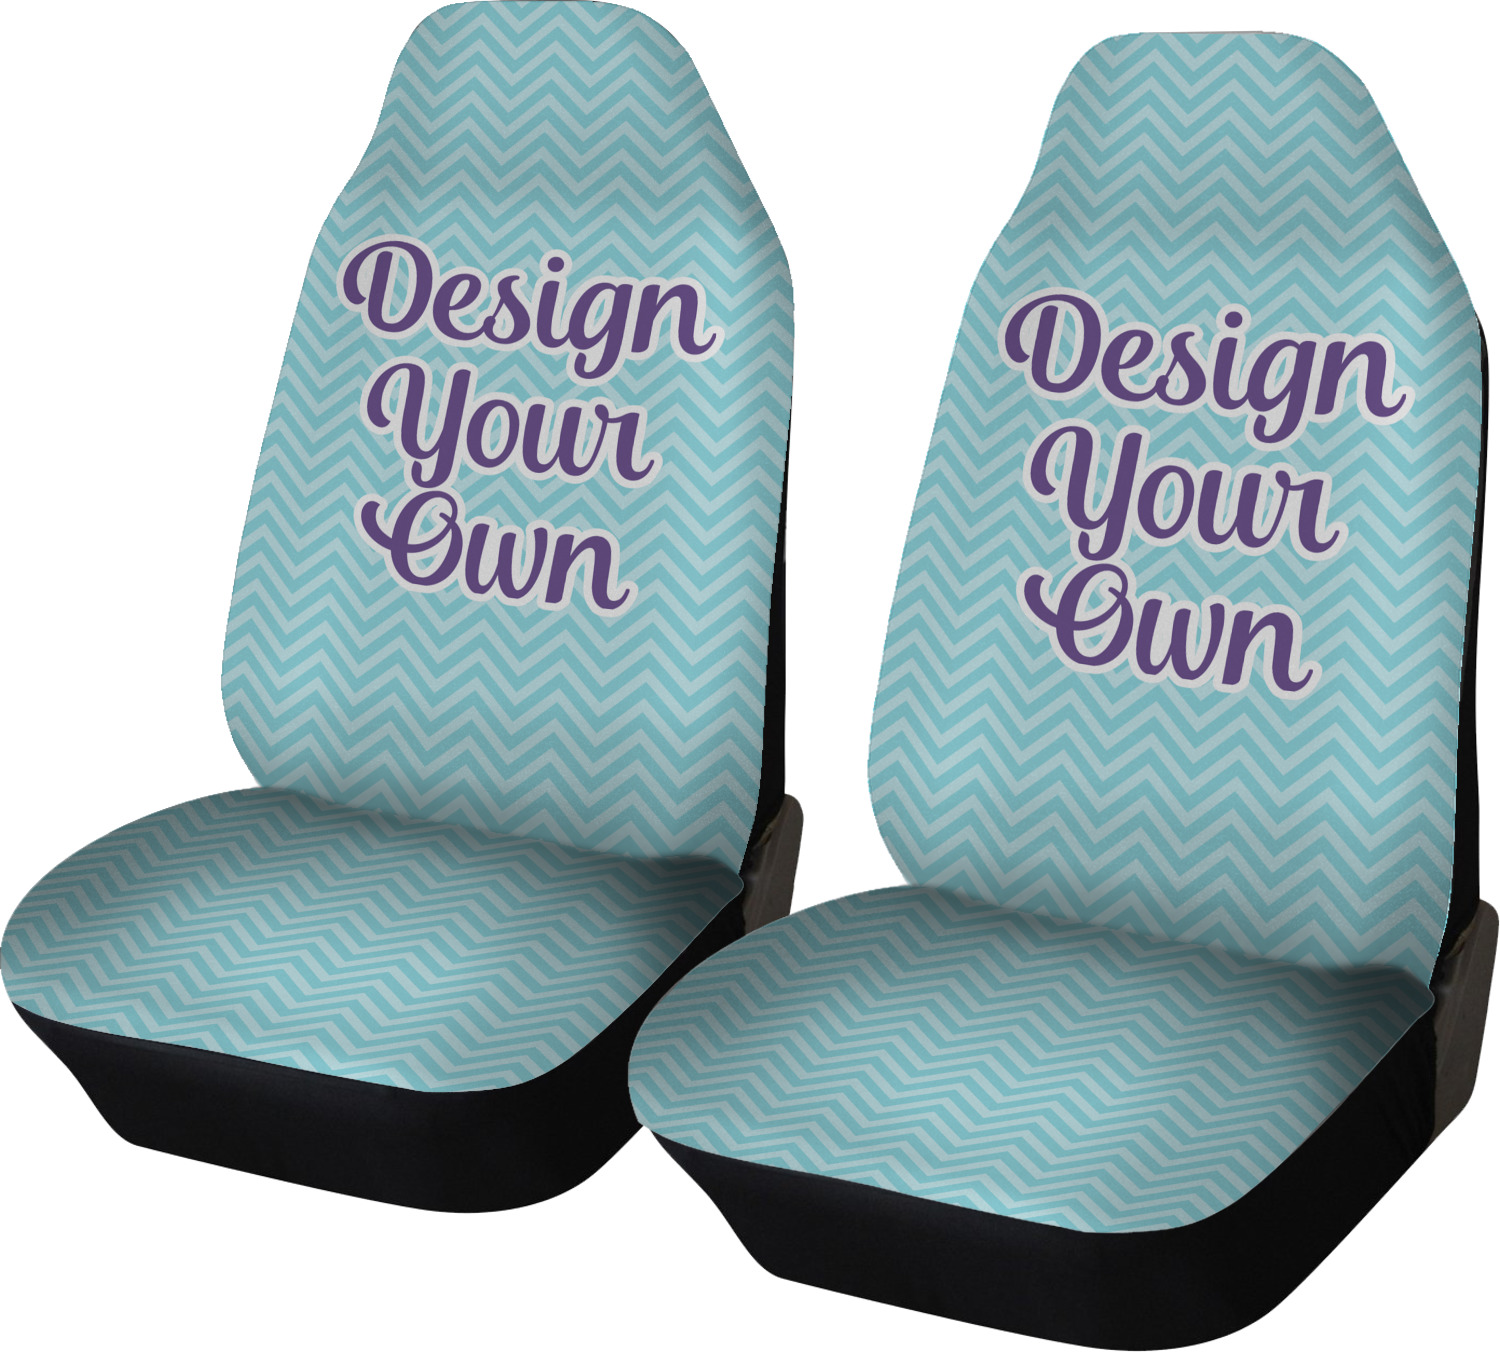 https://www.youcustomizeit.com/common/MAKE/965833/Design-Your-Own-Car-Seat-Covers.jpg?lm=1670568855